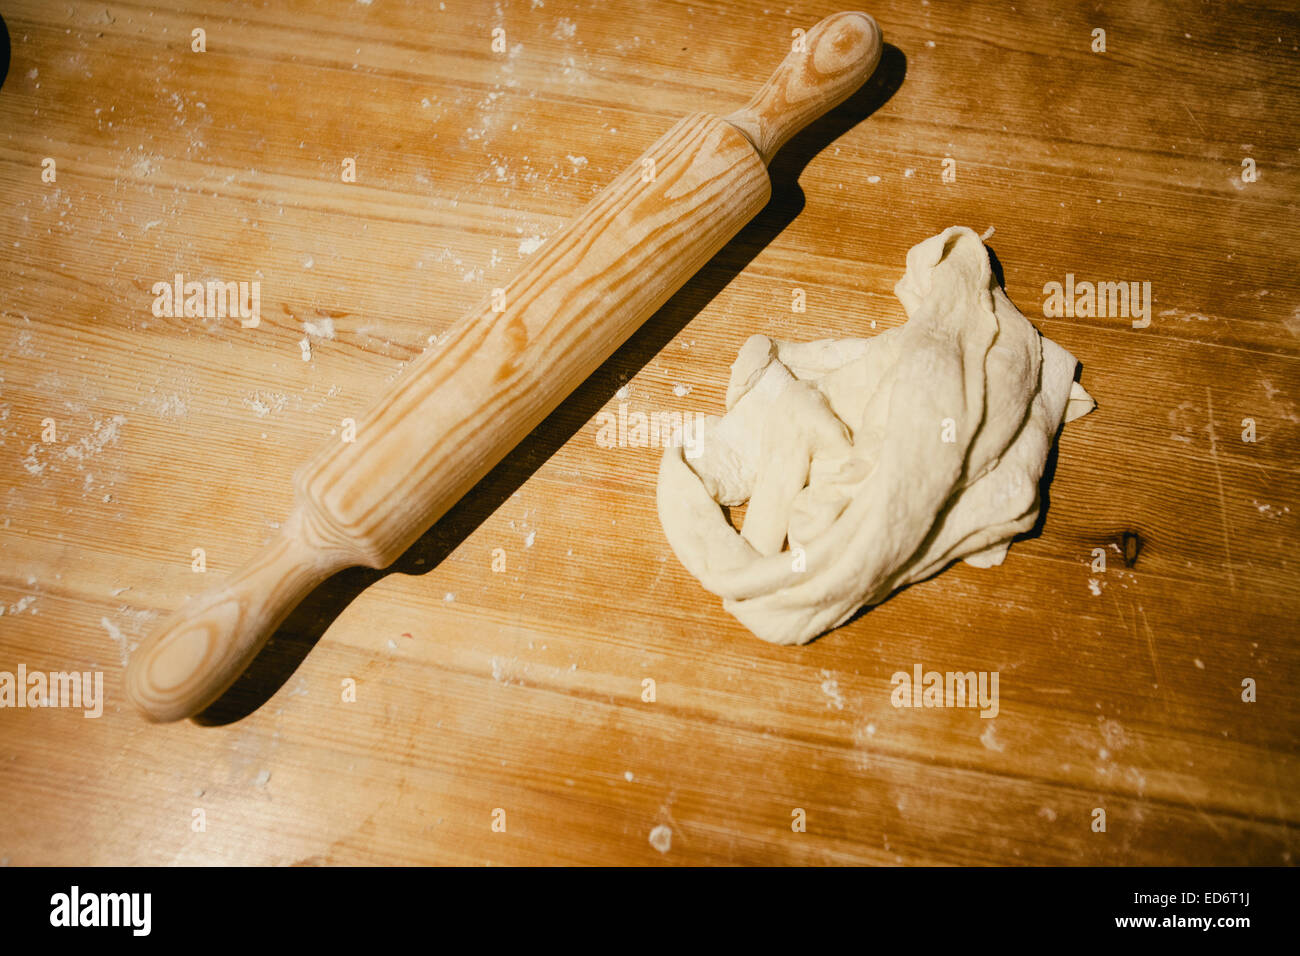 Bread dough and a roller on a wooden table Stock Photo